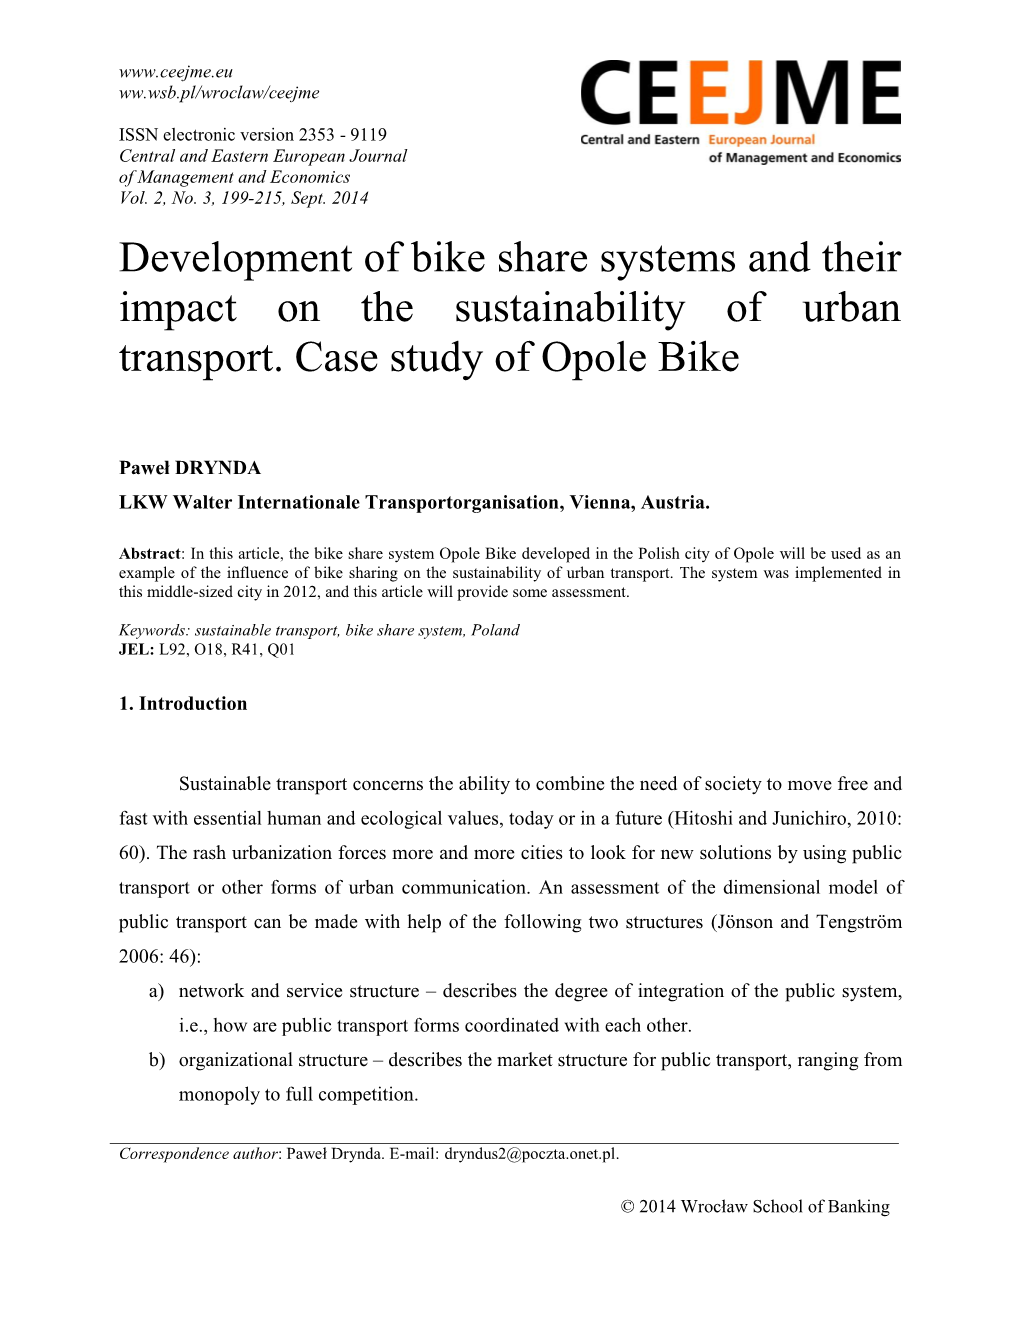 Development of Bike Share Systems and Their Impact on the Sustainability of Urban Transport